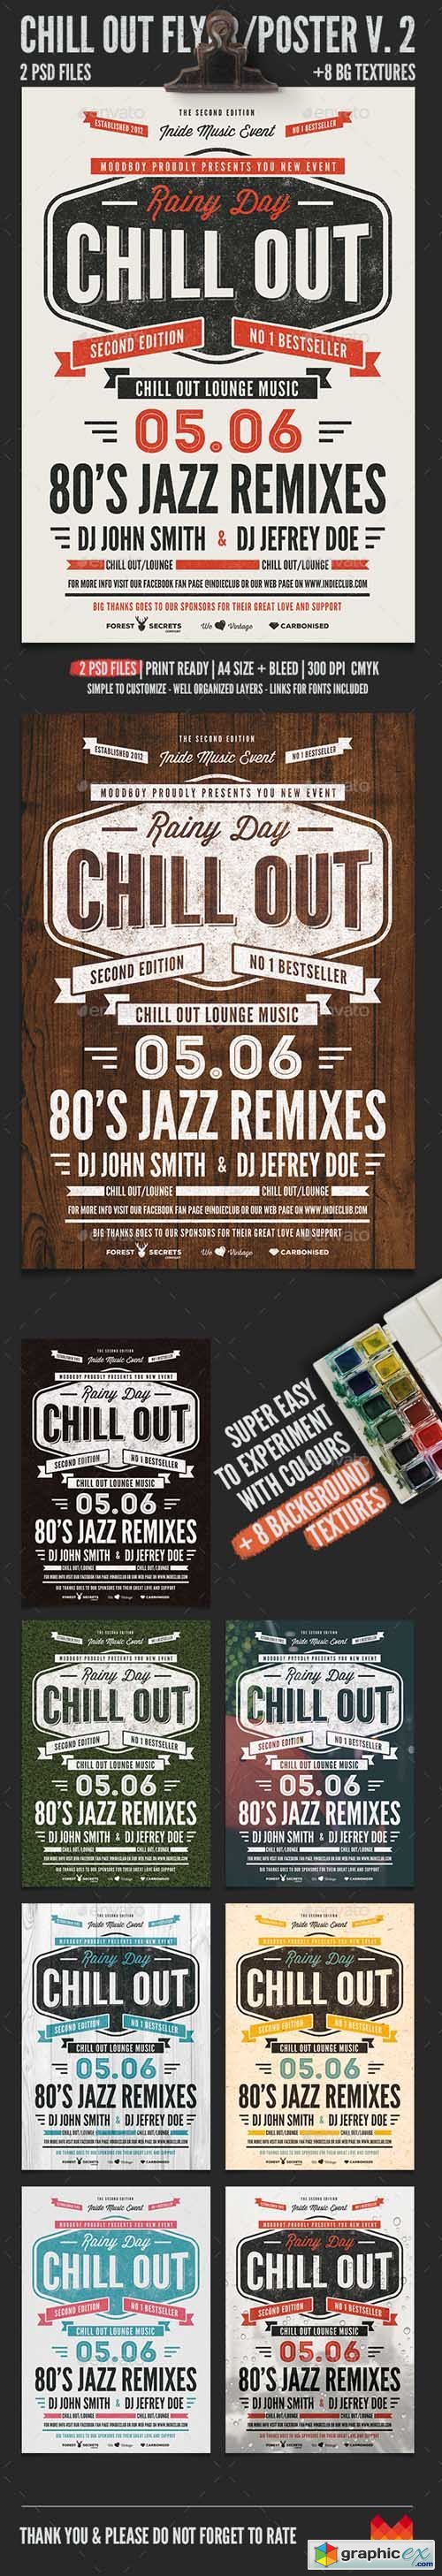 Chill Out Flyer/Poster V. 02